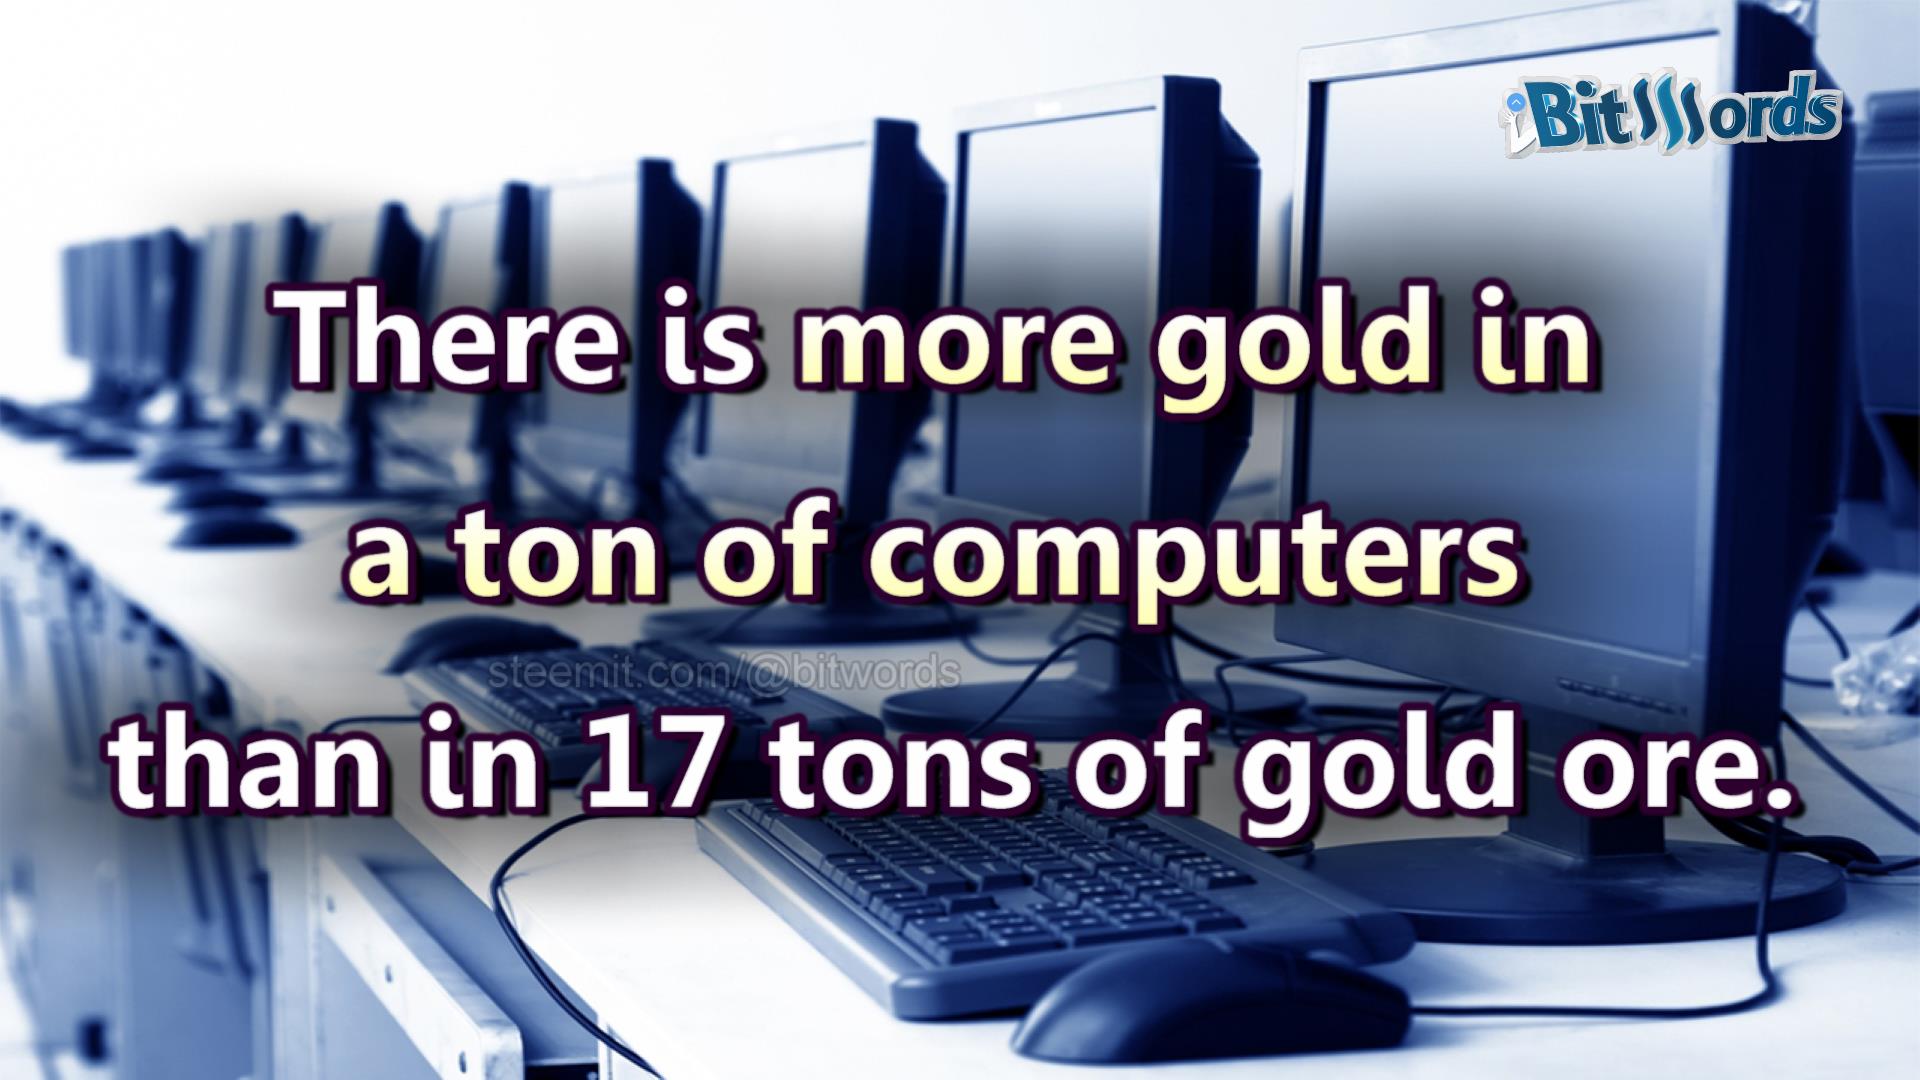 10 facts about gold bitwords steemit things you didnt know about gold (6).jpg